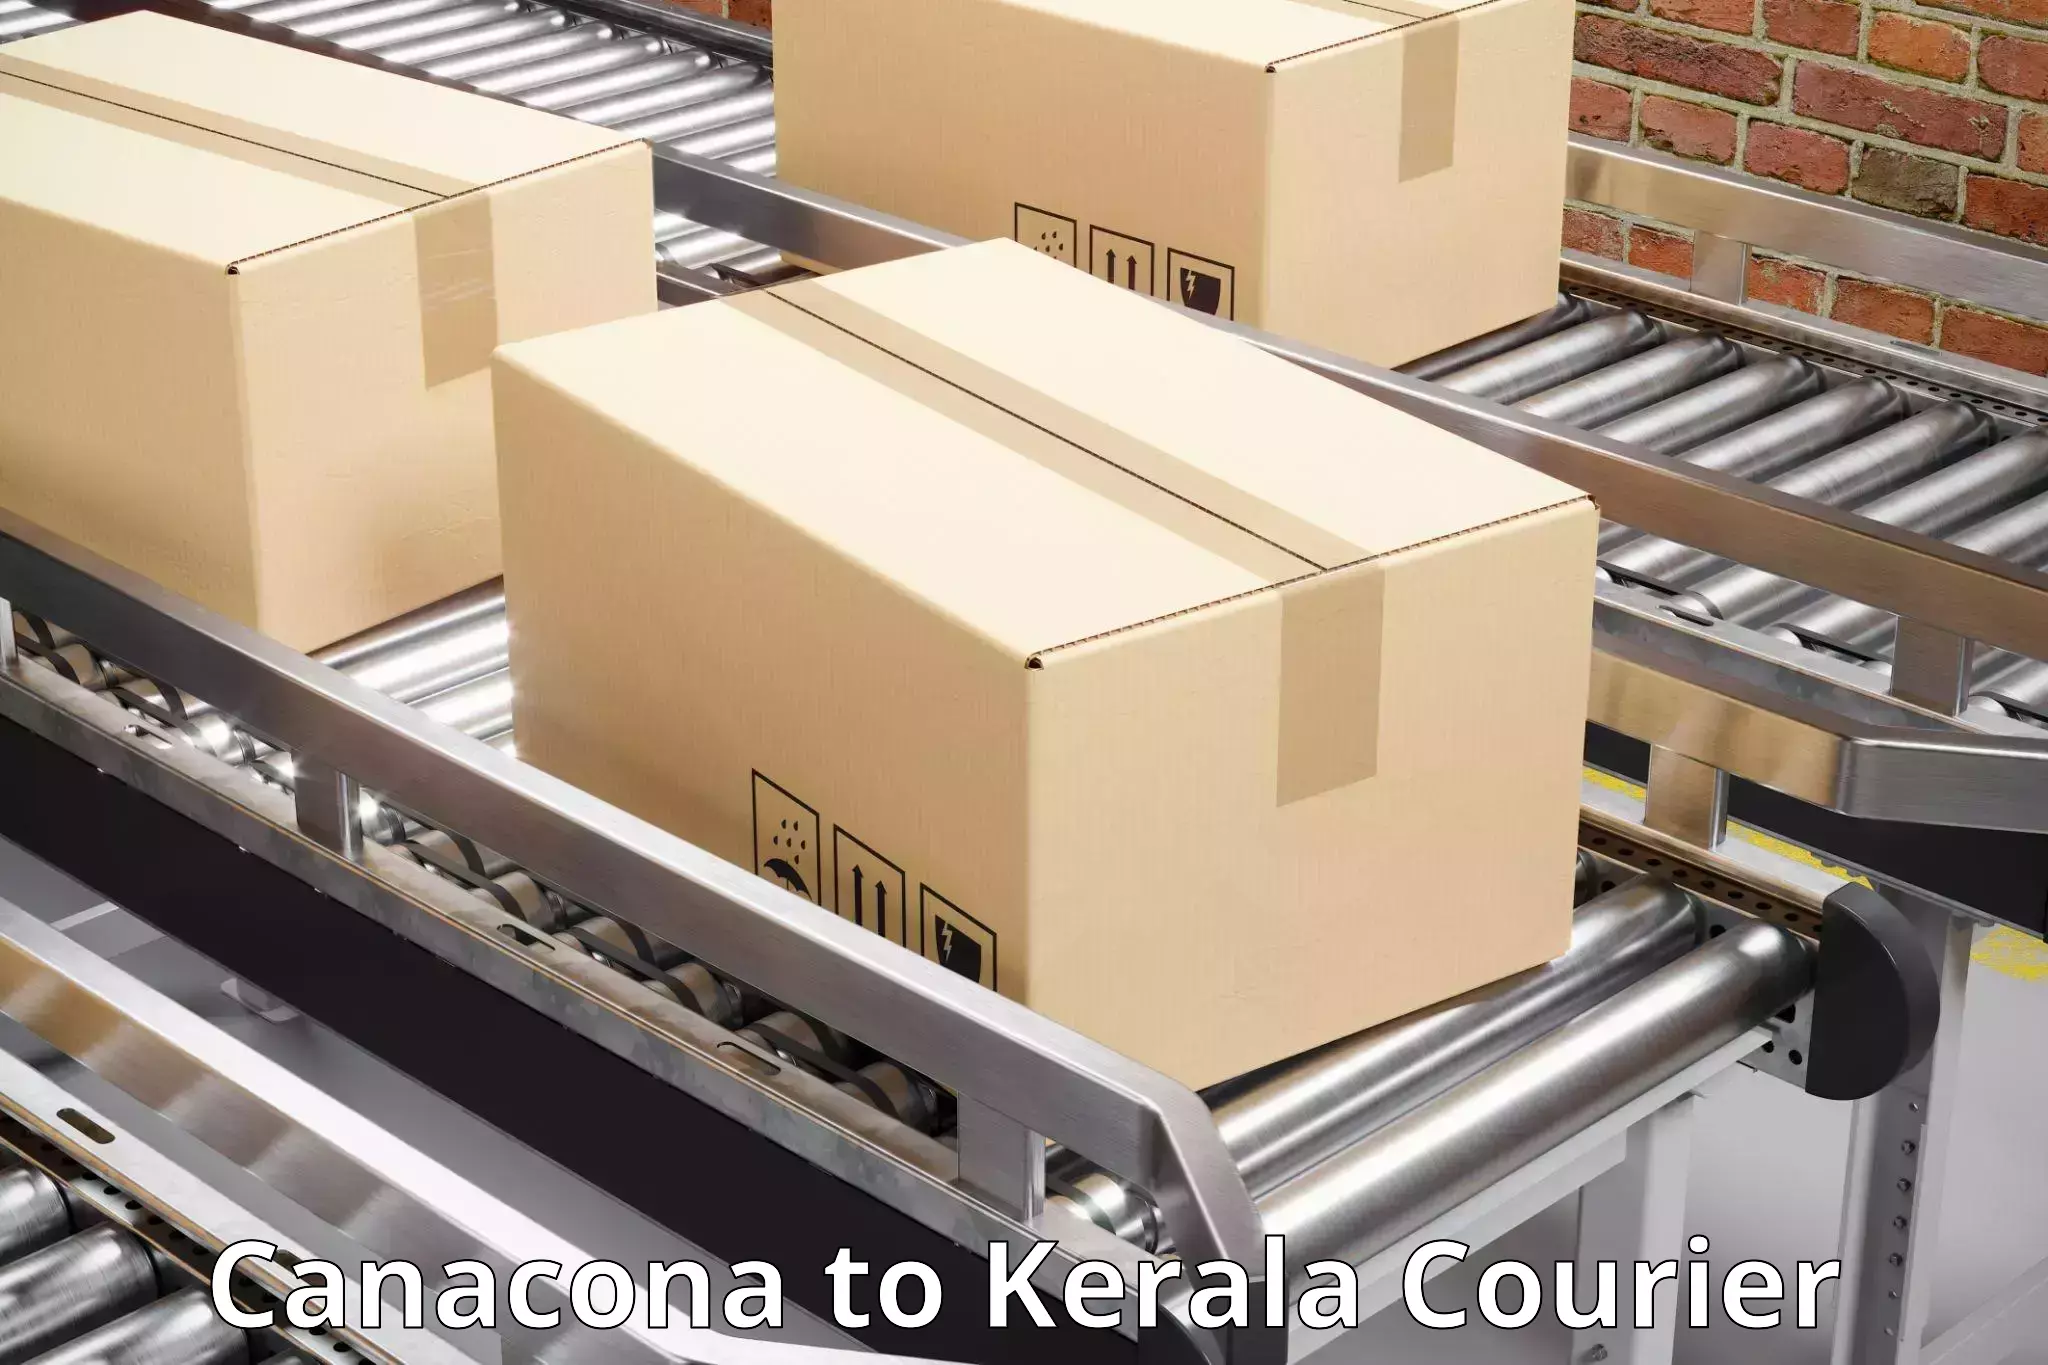 Lightweight parcel options Canacona to Mahe